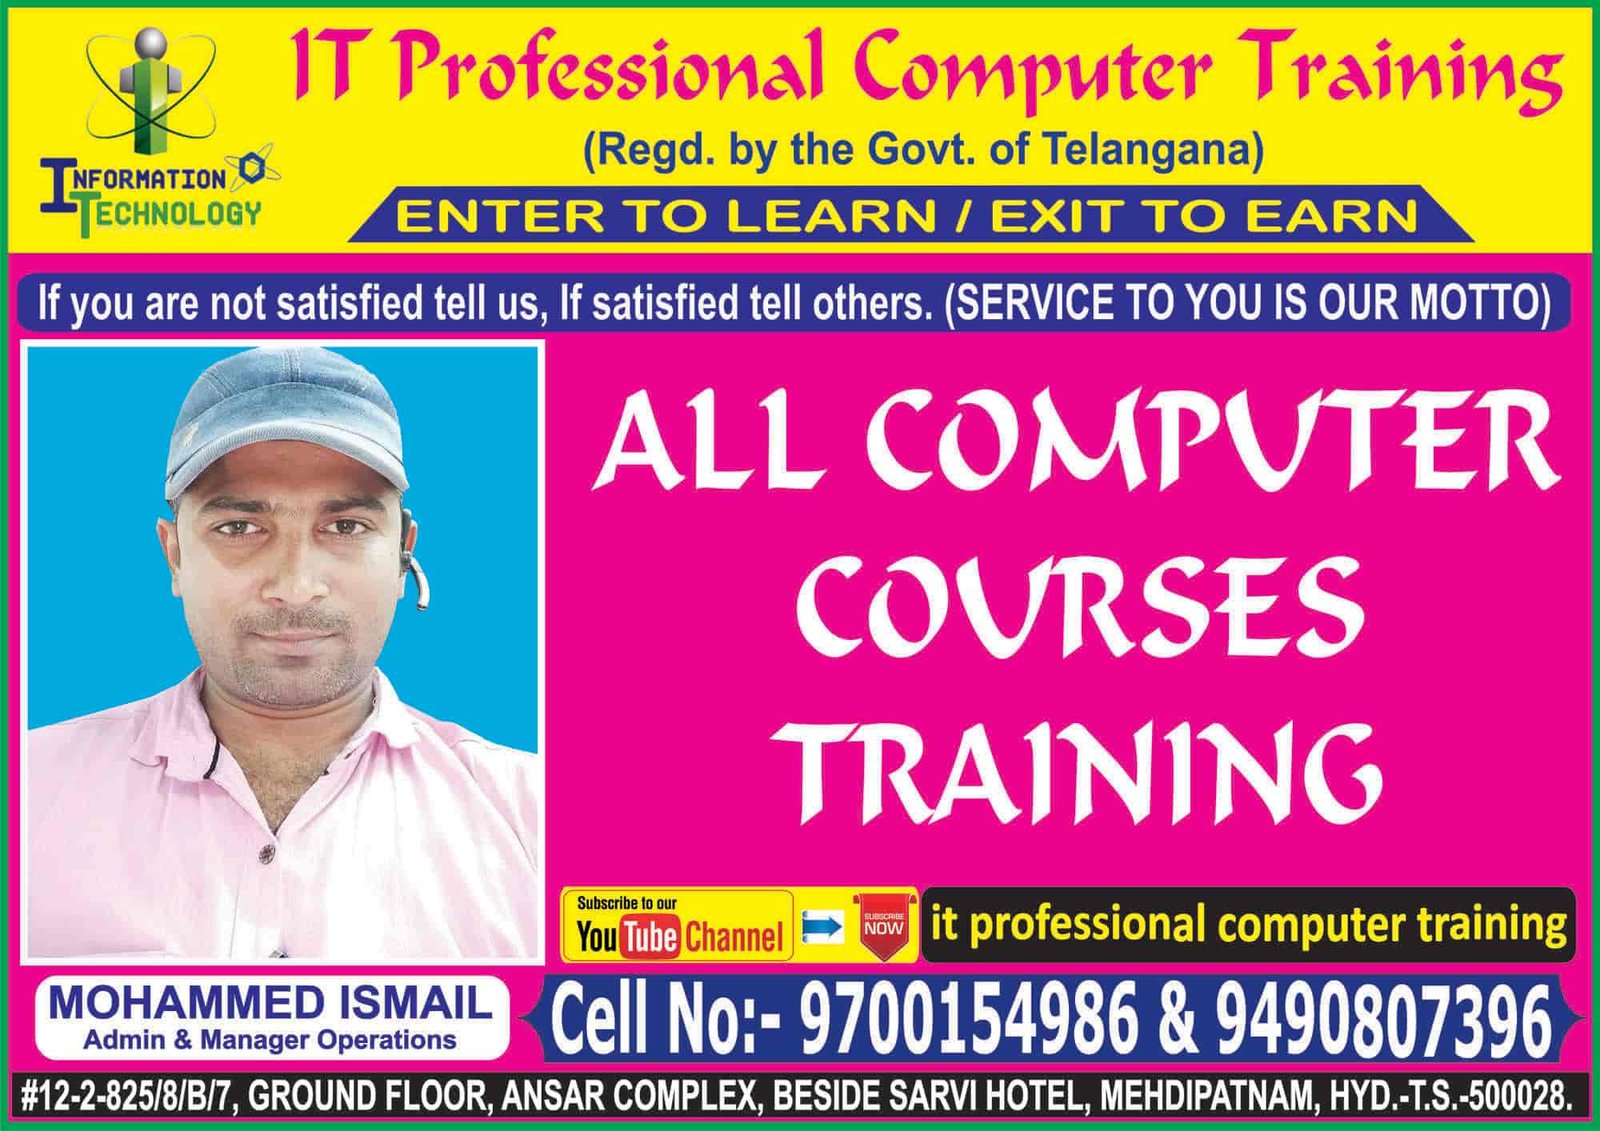 All Computer Courses Training